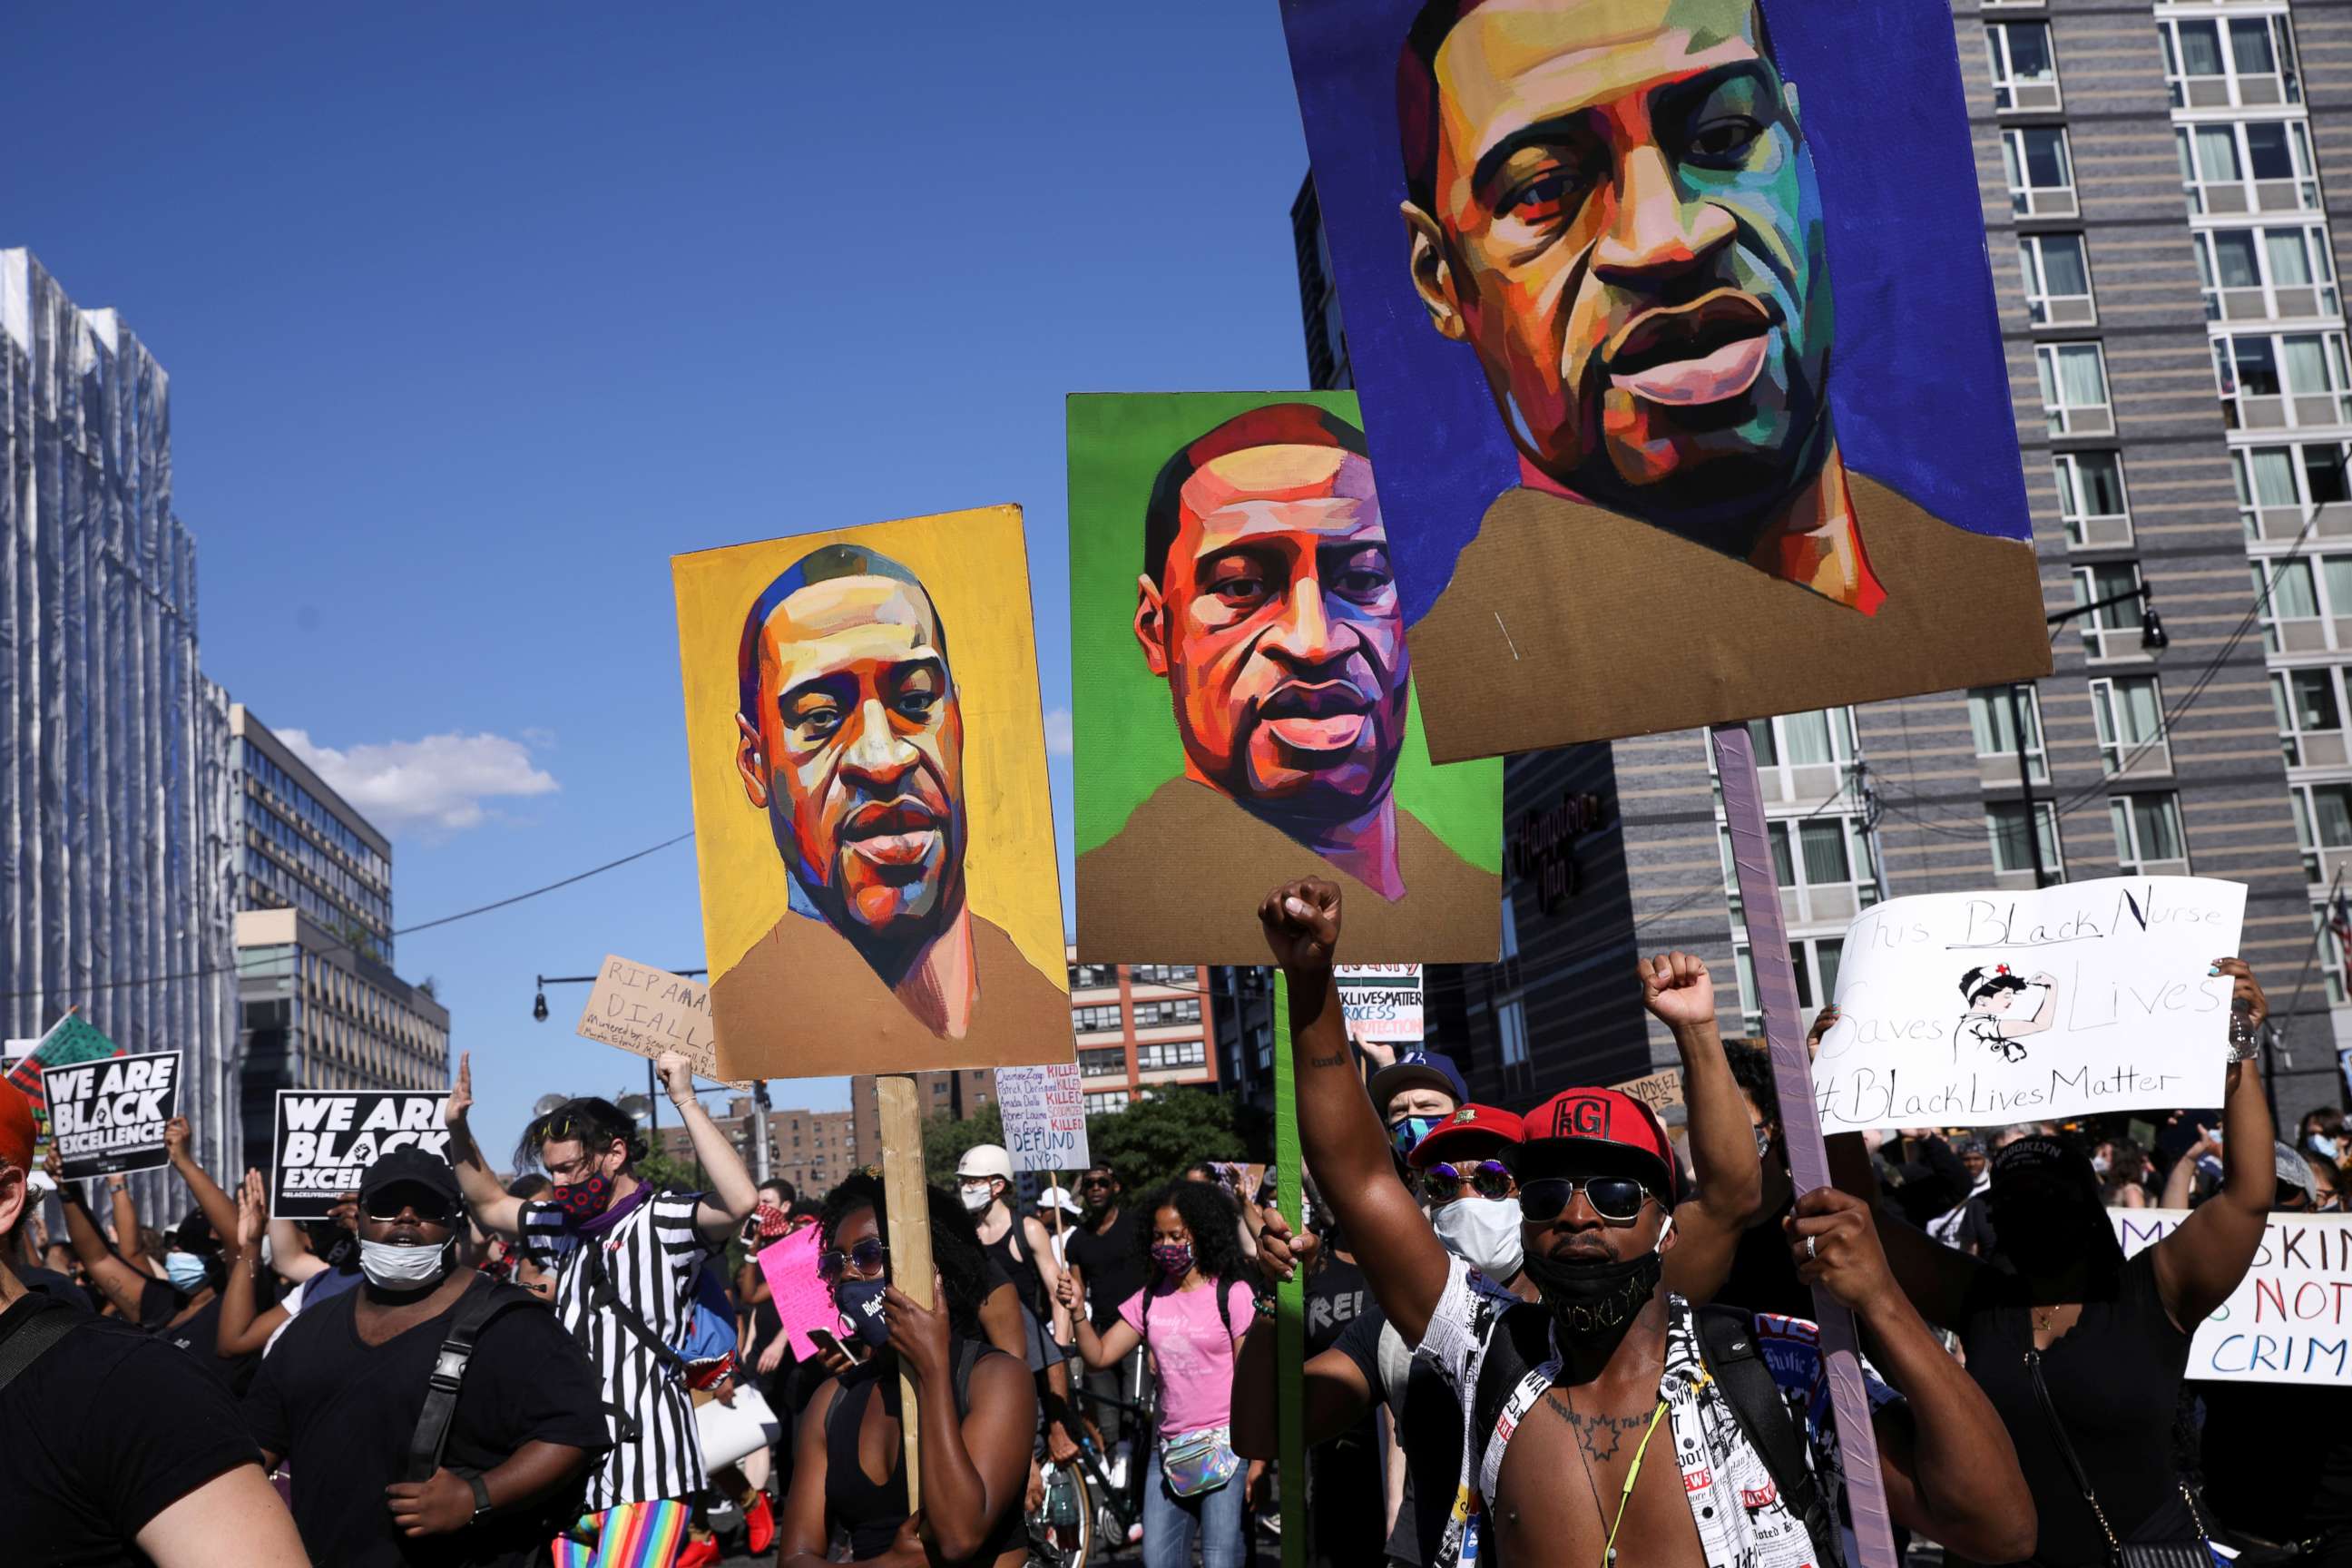 PHOTO: Demonstrators hold signs depicting George Floyd, who died in Minneapolis police custody, during a protest against police brutality and racial inequality in Brooklyn, New York, June 13, 2020.